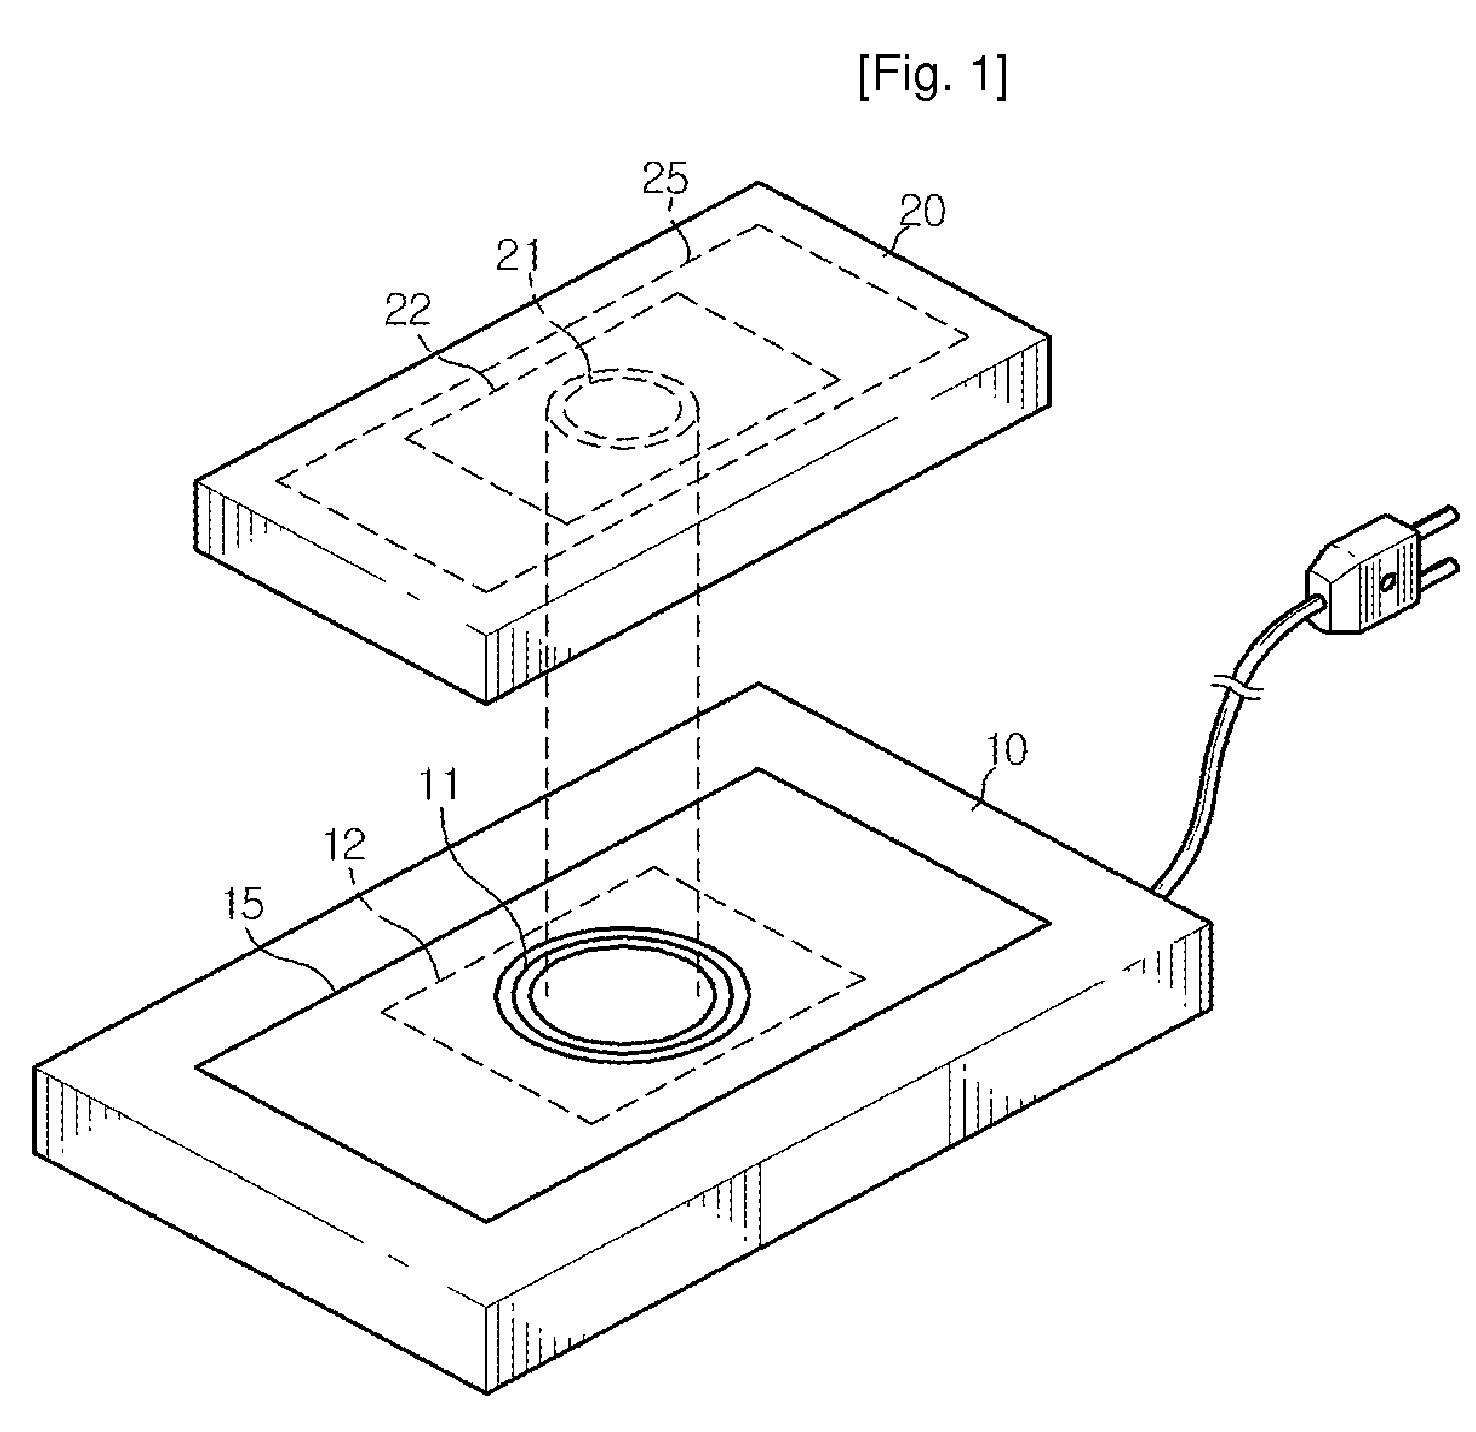 Contact-less power supply, contact-less charger systems and method for charging rechargeable battery cell